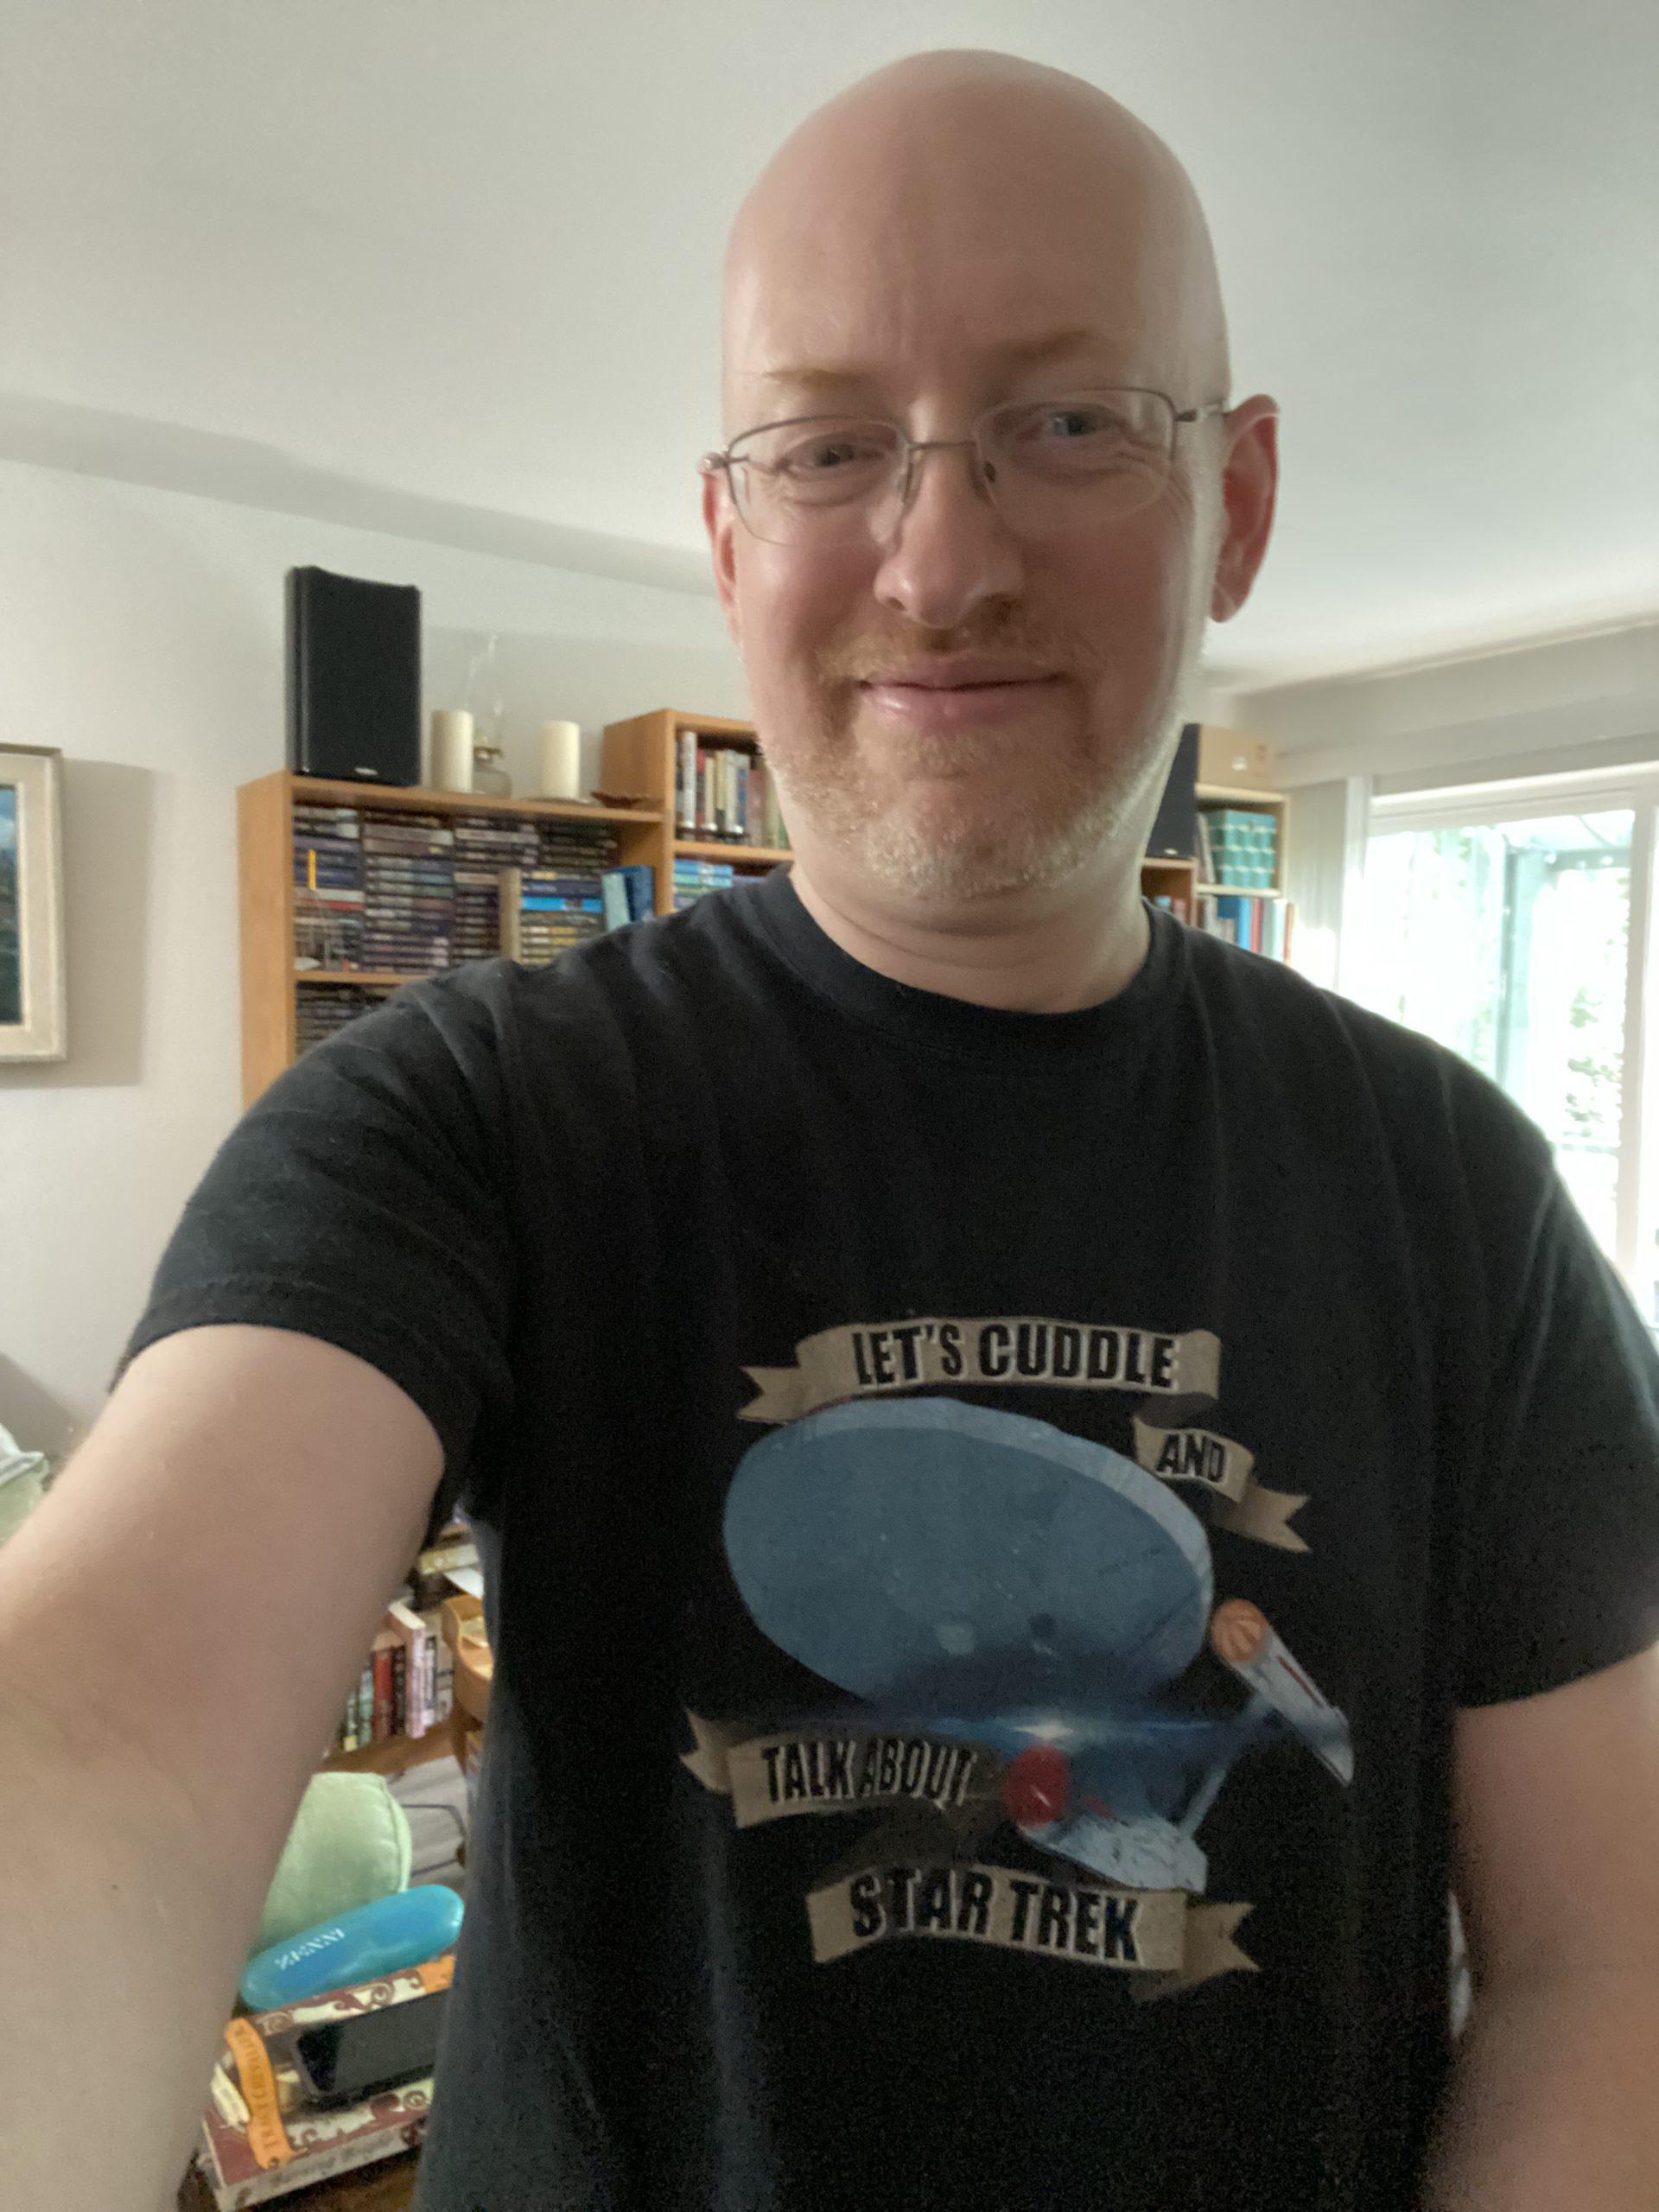 Me wearing a t-shirt with an illustration of the original USS Enterprise and text saying "Let's cuddle and talk about Star Trek".